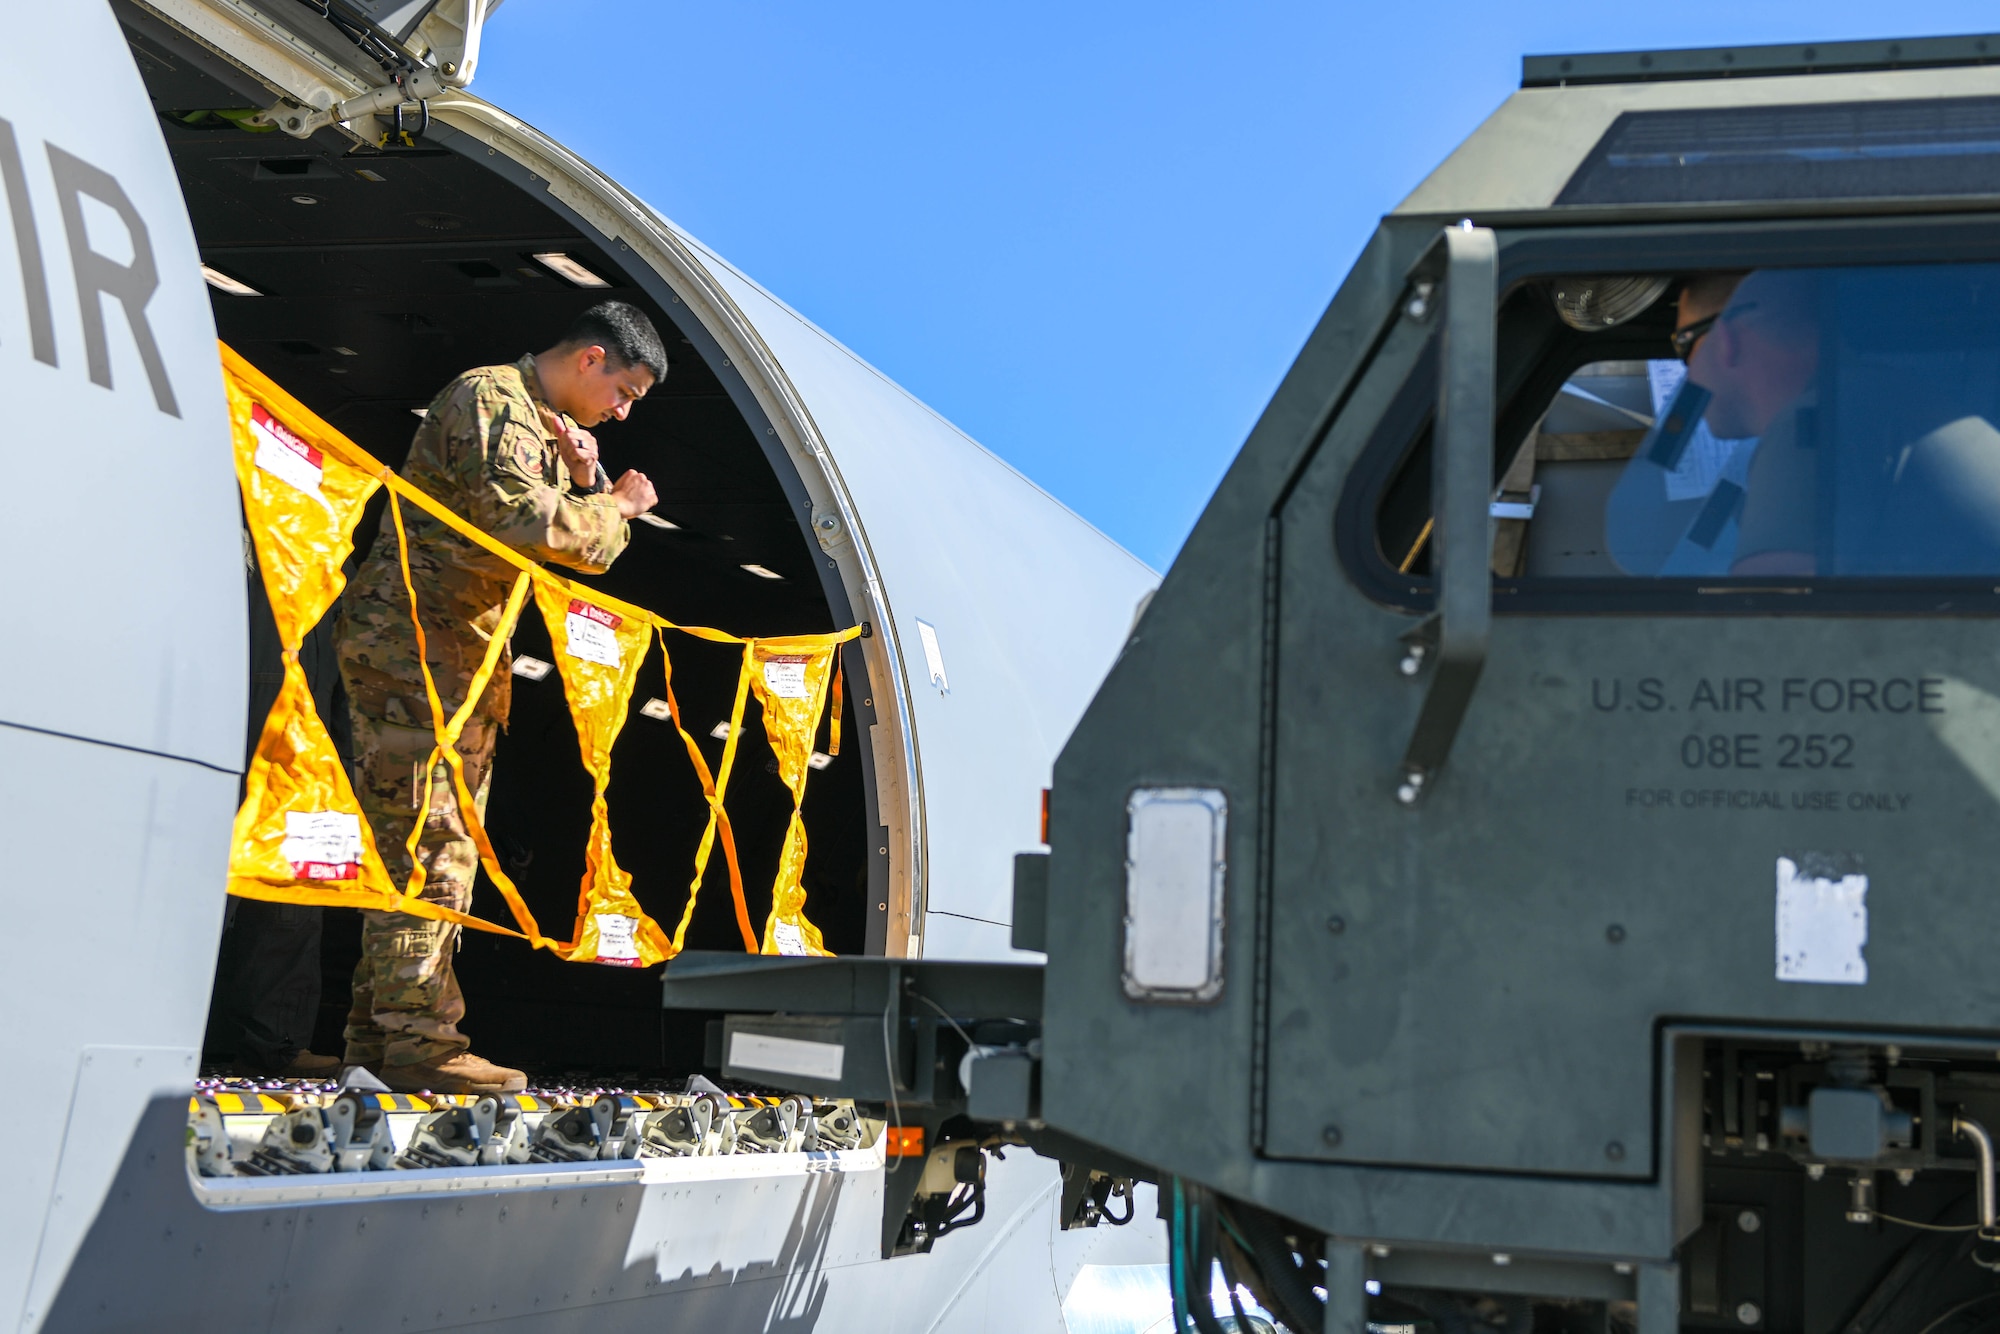 U.S. Air Force Tech. Sgt. Joshua Granados, 56th Air Refueling Squadron (ARS) loadmaster, directs a 60K aircraft cargo loader/transporter on Luke Air Force Base (AFB), Arizona, Jan. 27, 2022. The 56th ARS assisted the 56th Operations Group during Silver Paladin, moving both cargo and passengers to Tyndall AFB. (U.S. Air Force photo by Airman 1st Class Trenton Jancze)